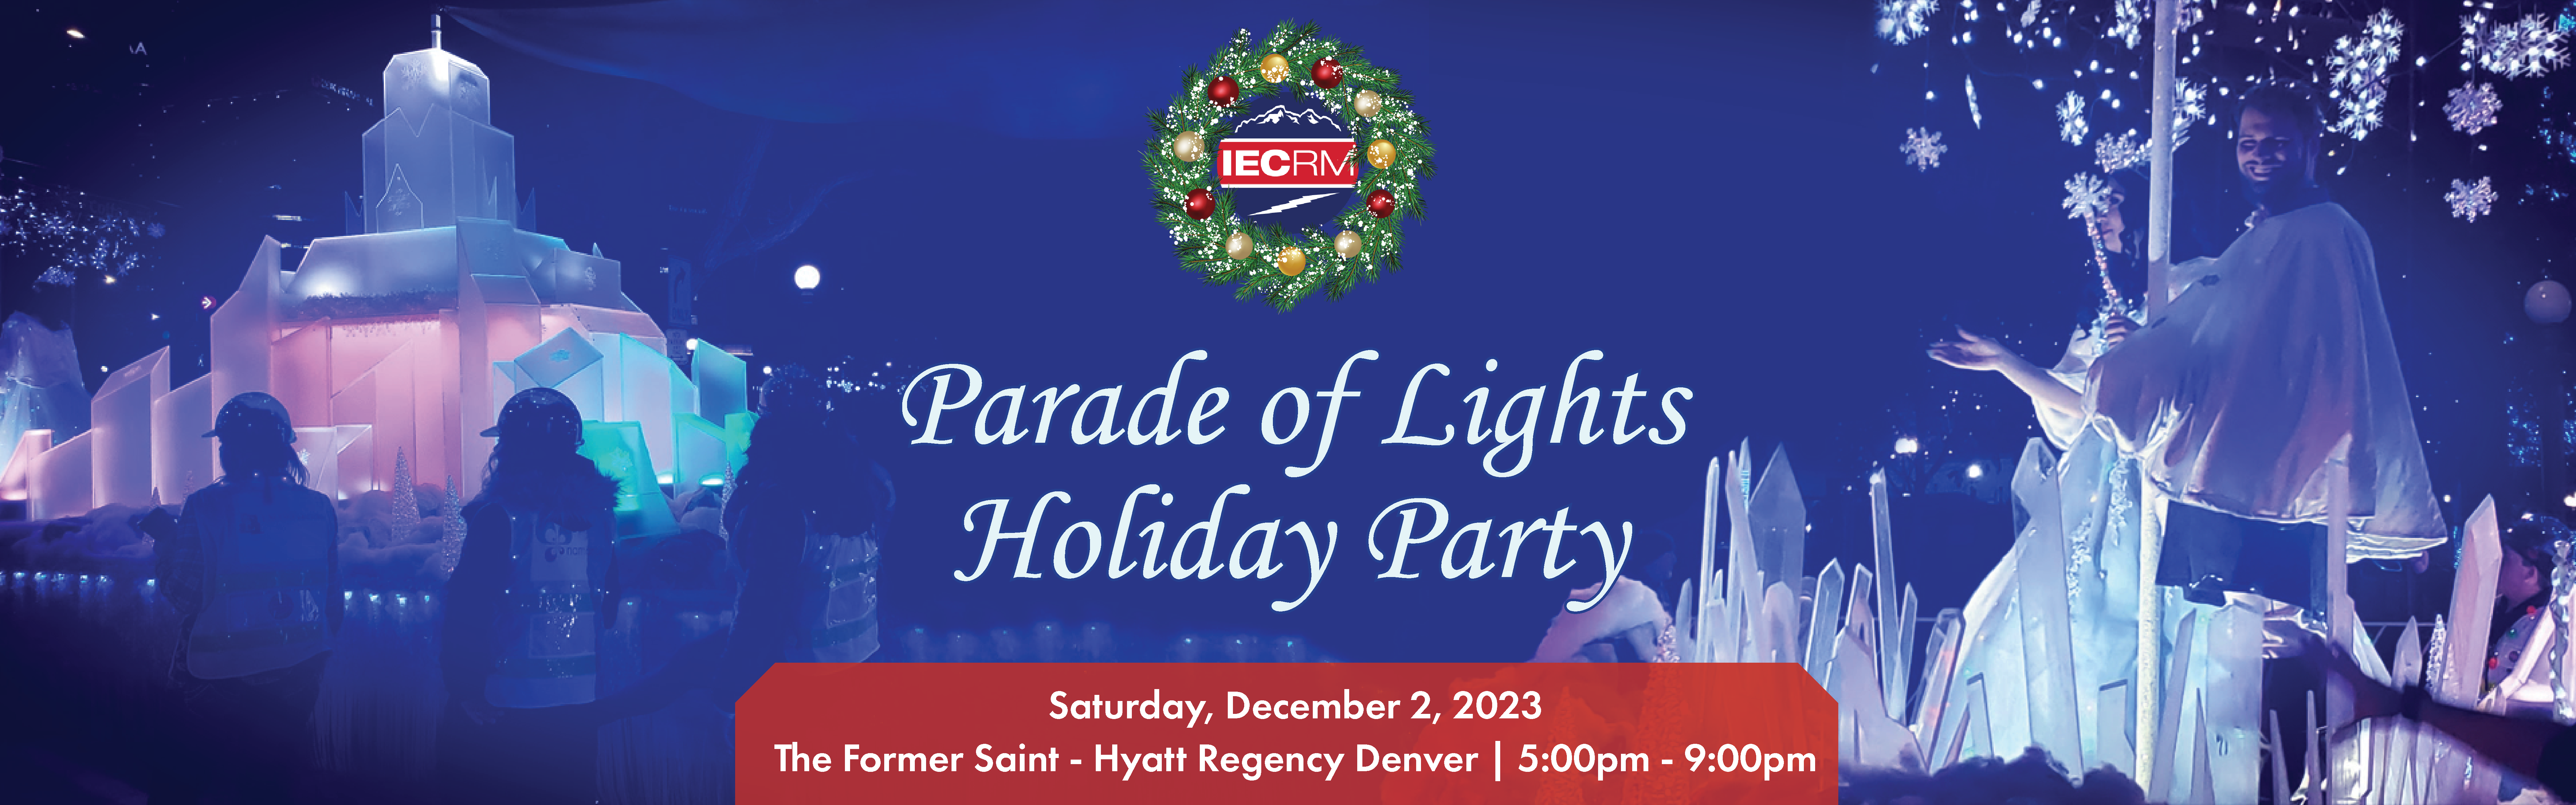 SPONSOR the IECRM Holiday Parade Party